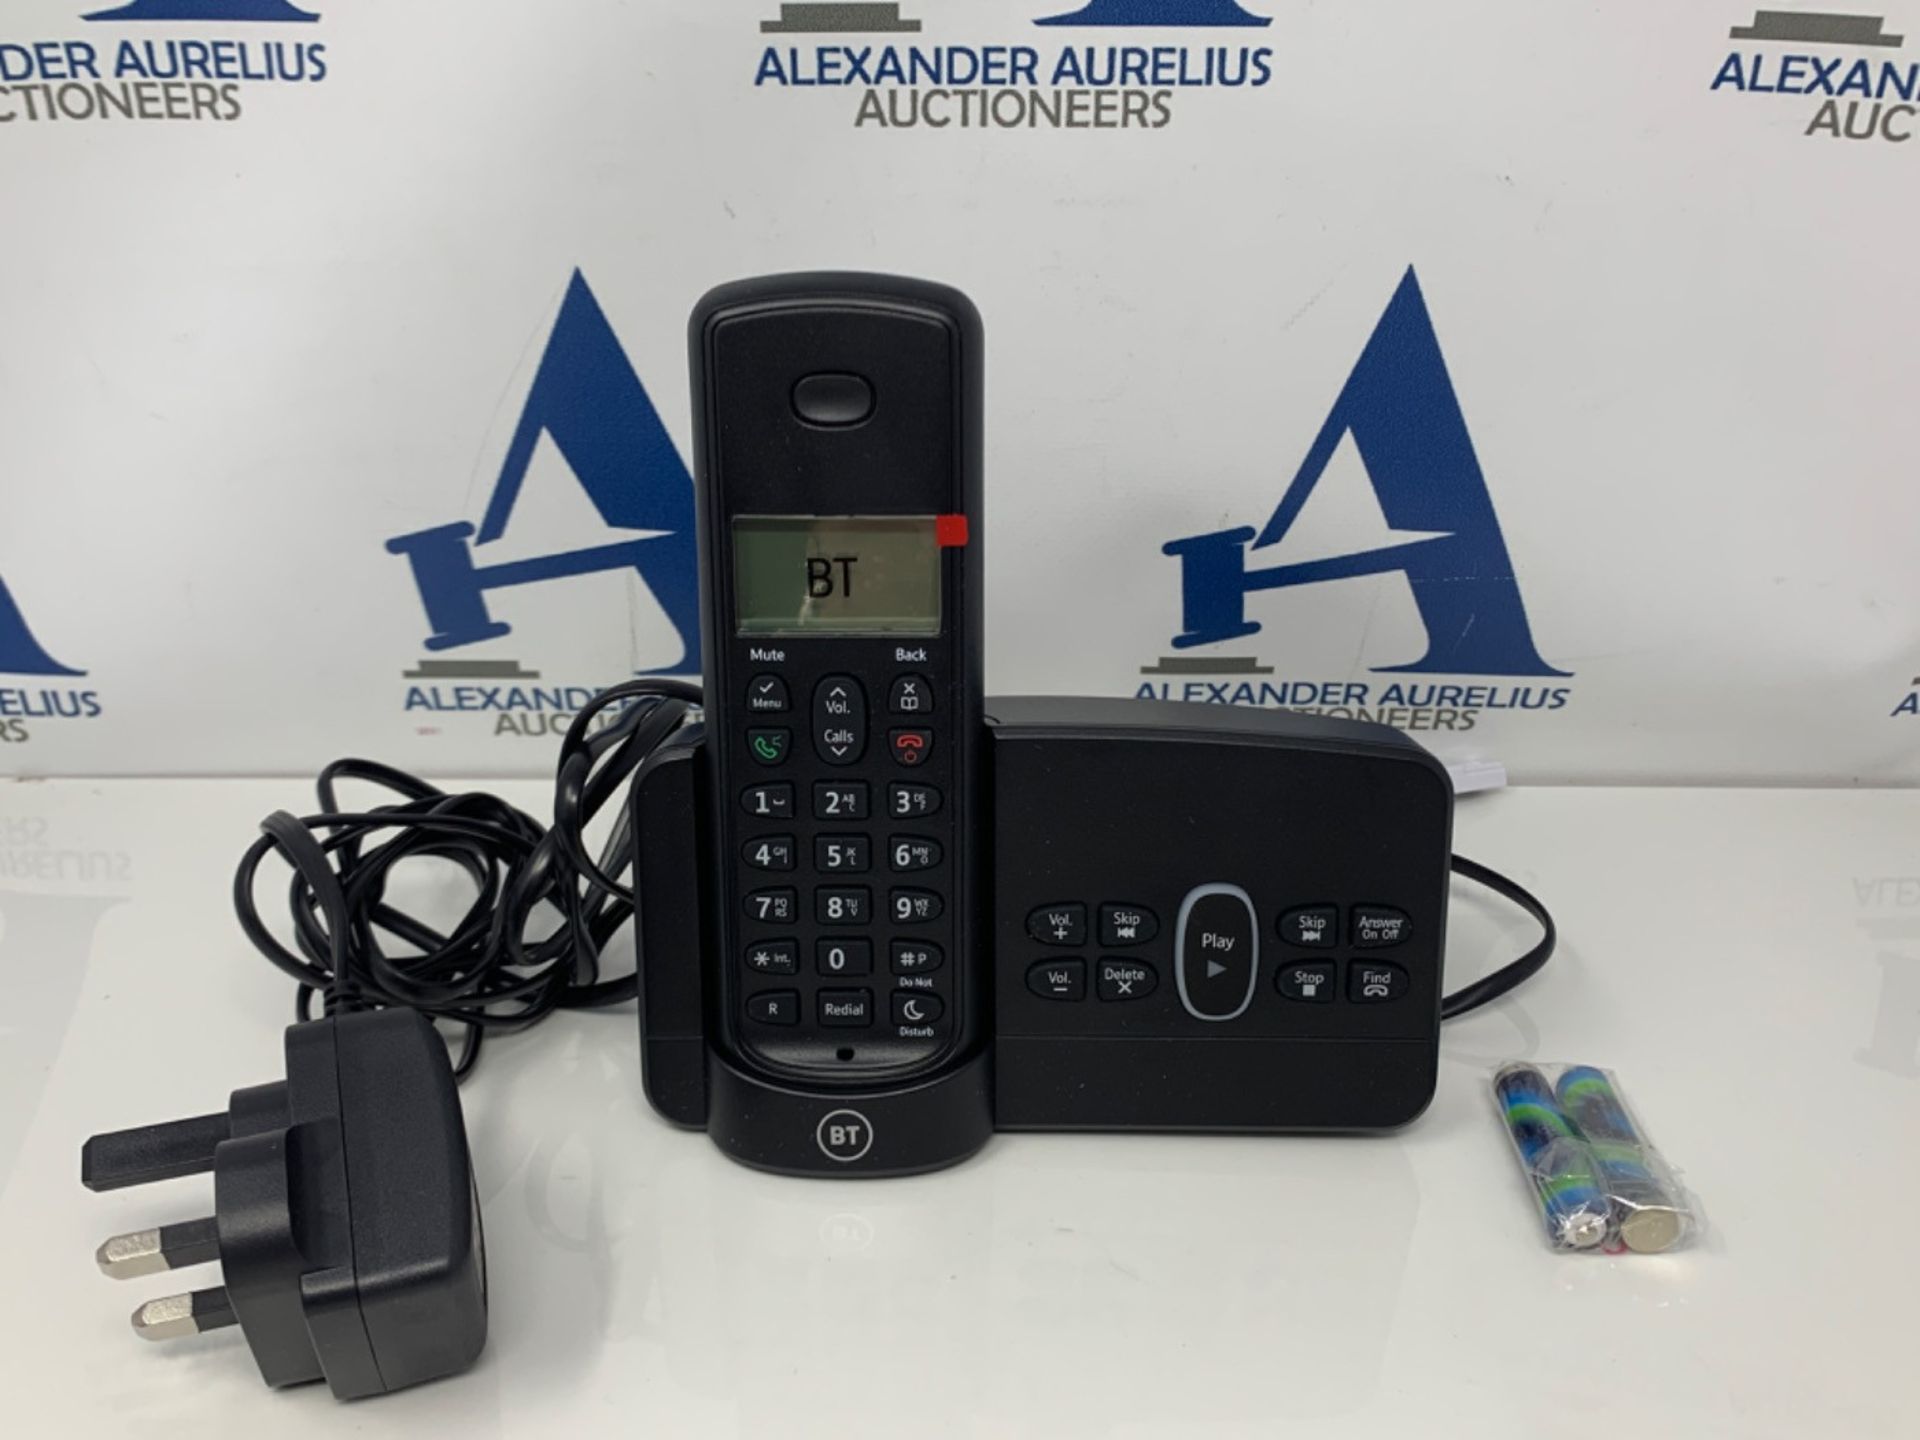 BT Home Phone with Nuisance Call Blocking and Answer Machine (Single Handset Pack)